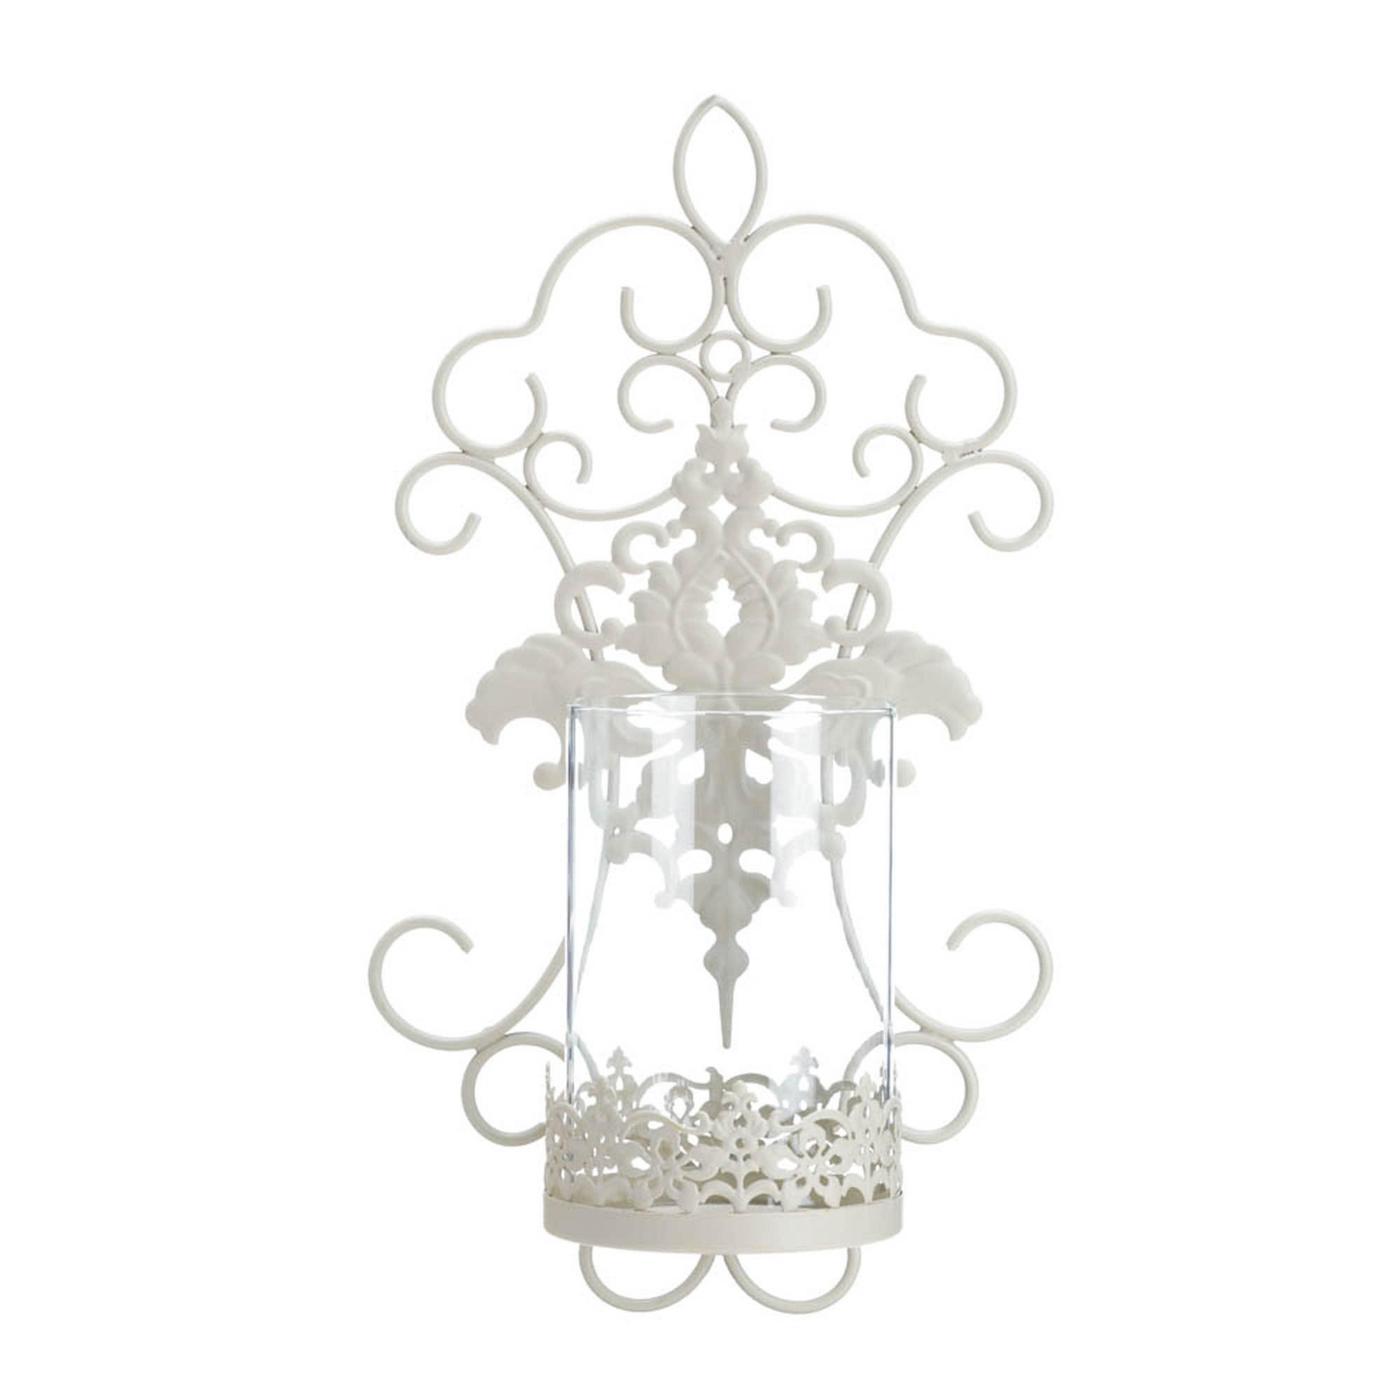 Romantic Lace Wall Sconce - $33.58